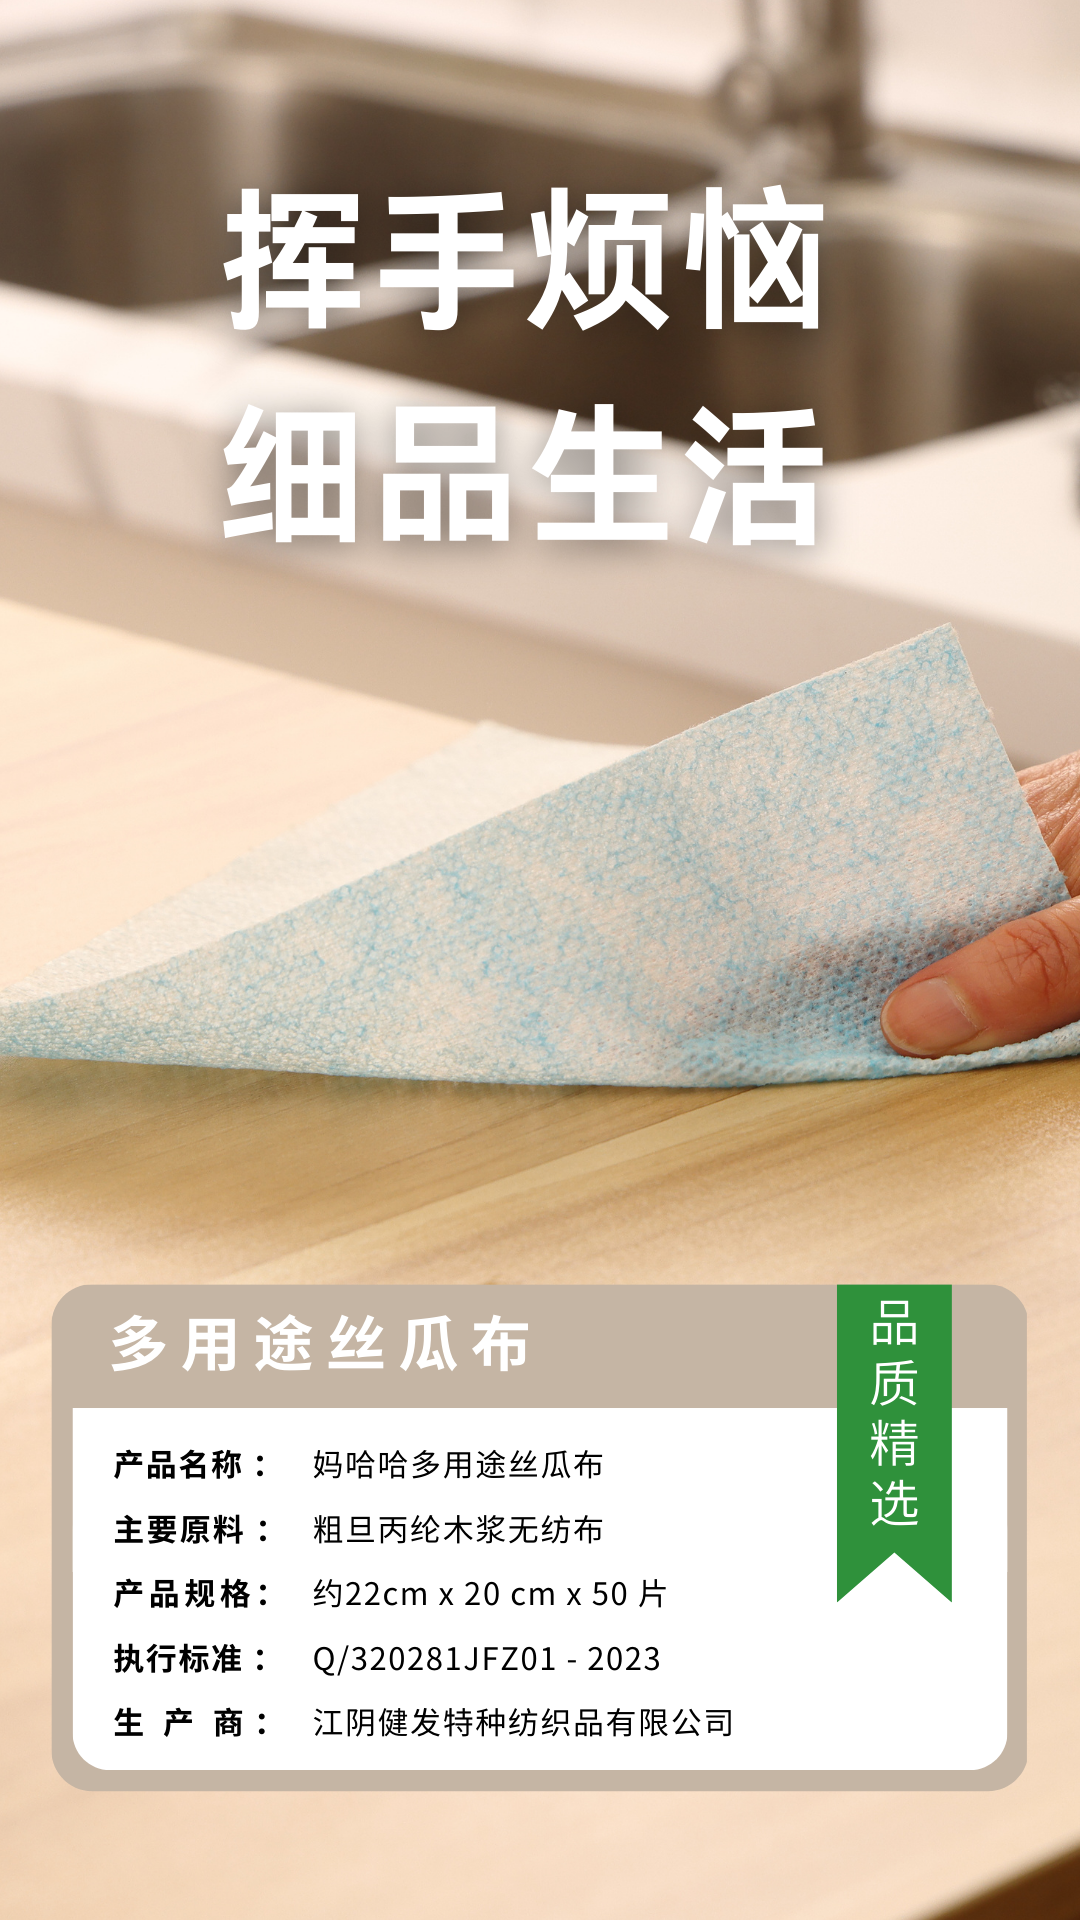 Multipurpose loofah cloth, disposable wet and dry household cleaning products, kitchen paper